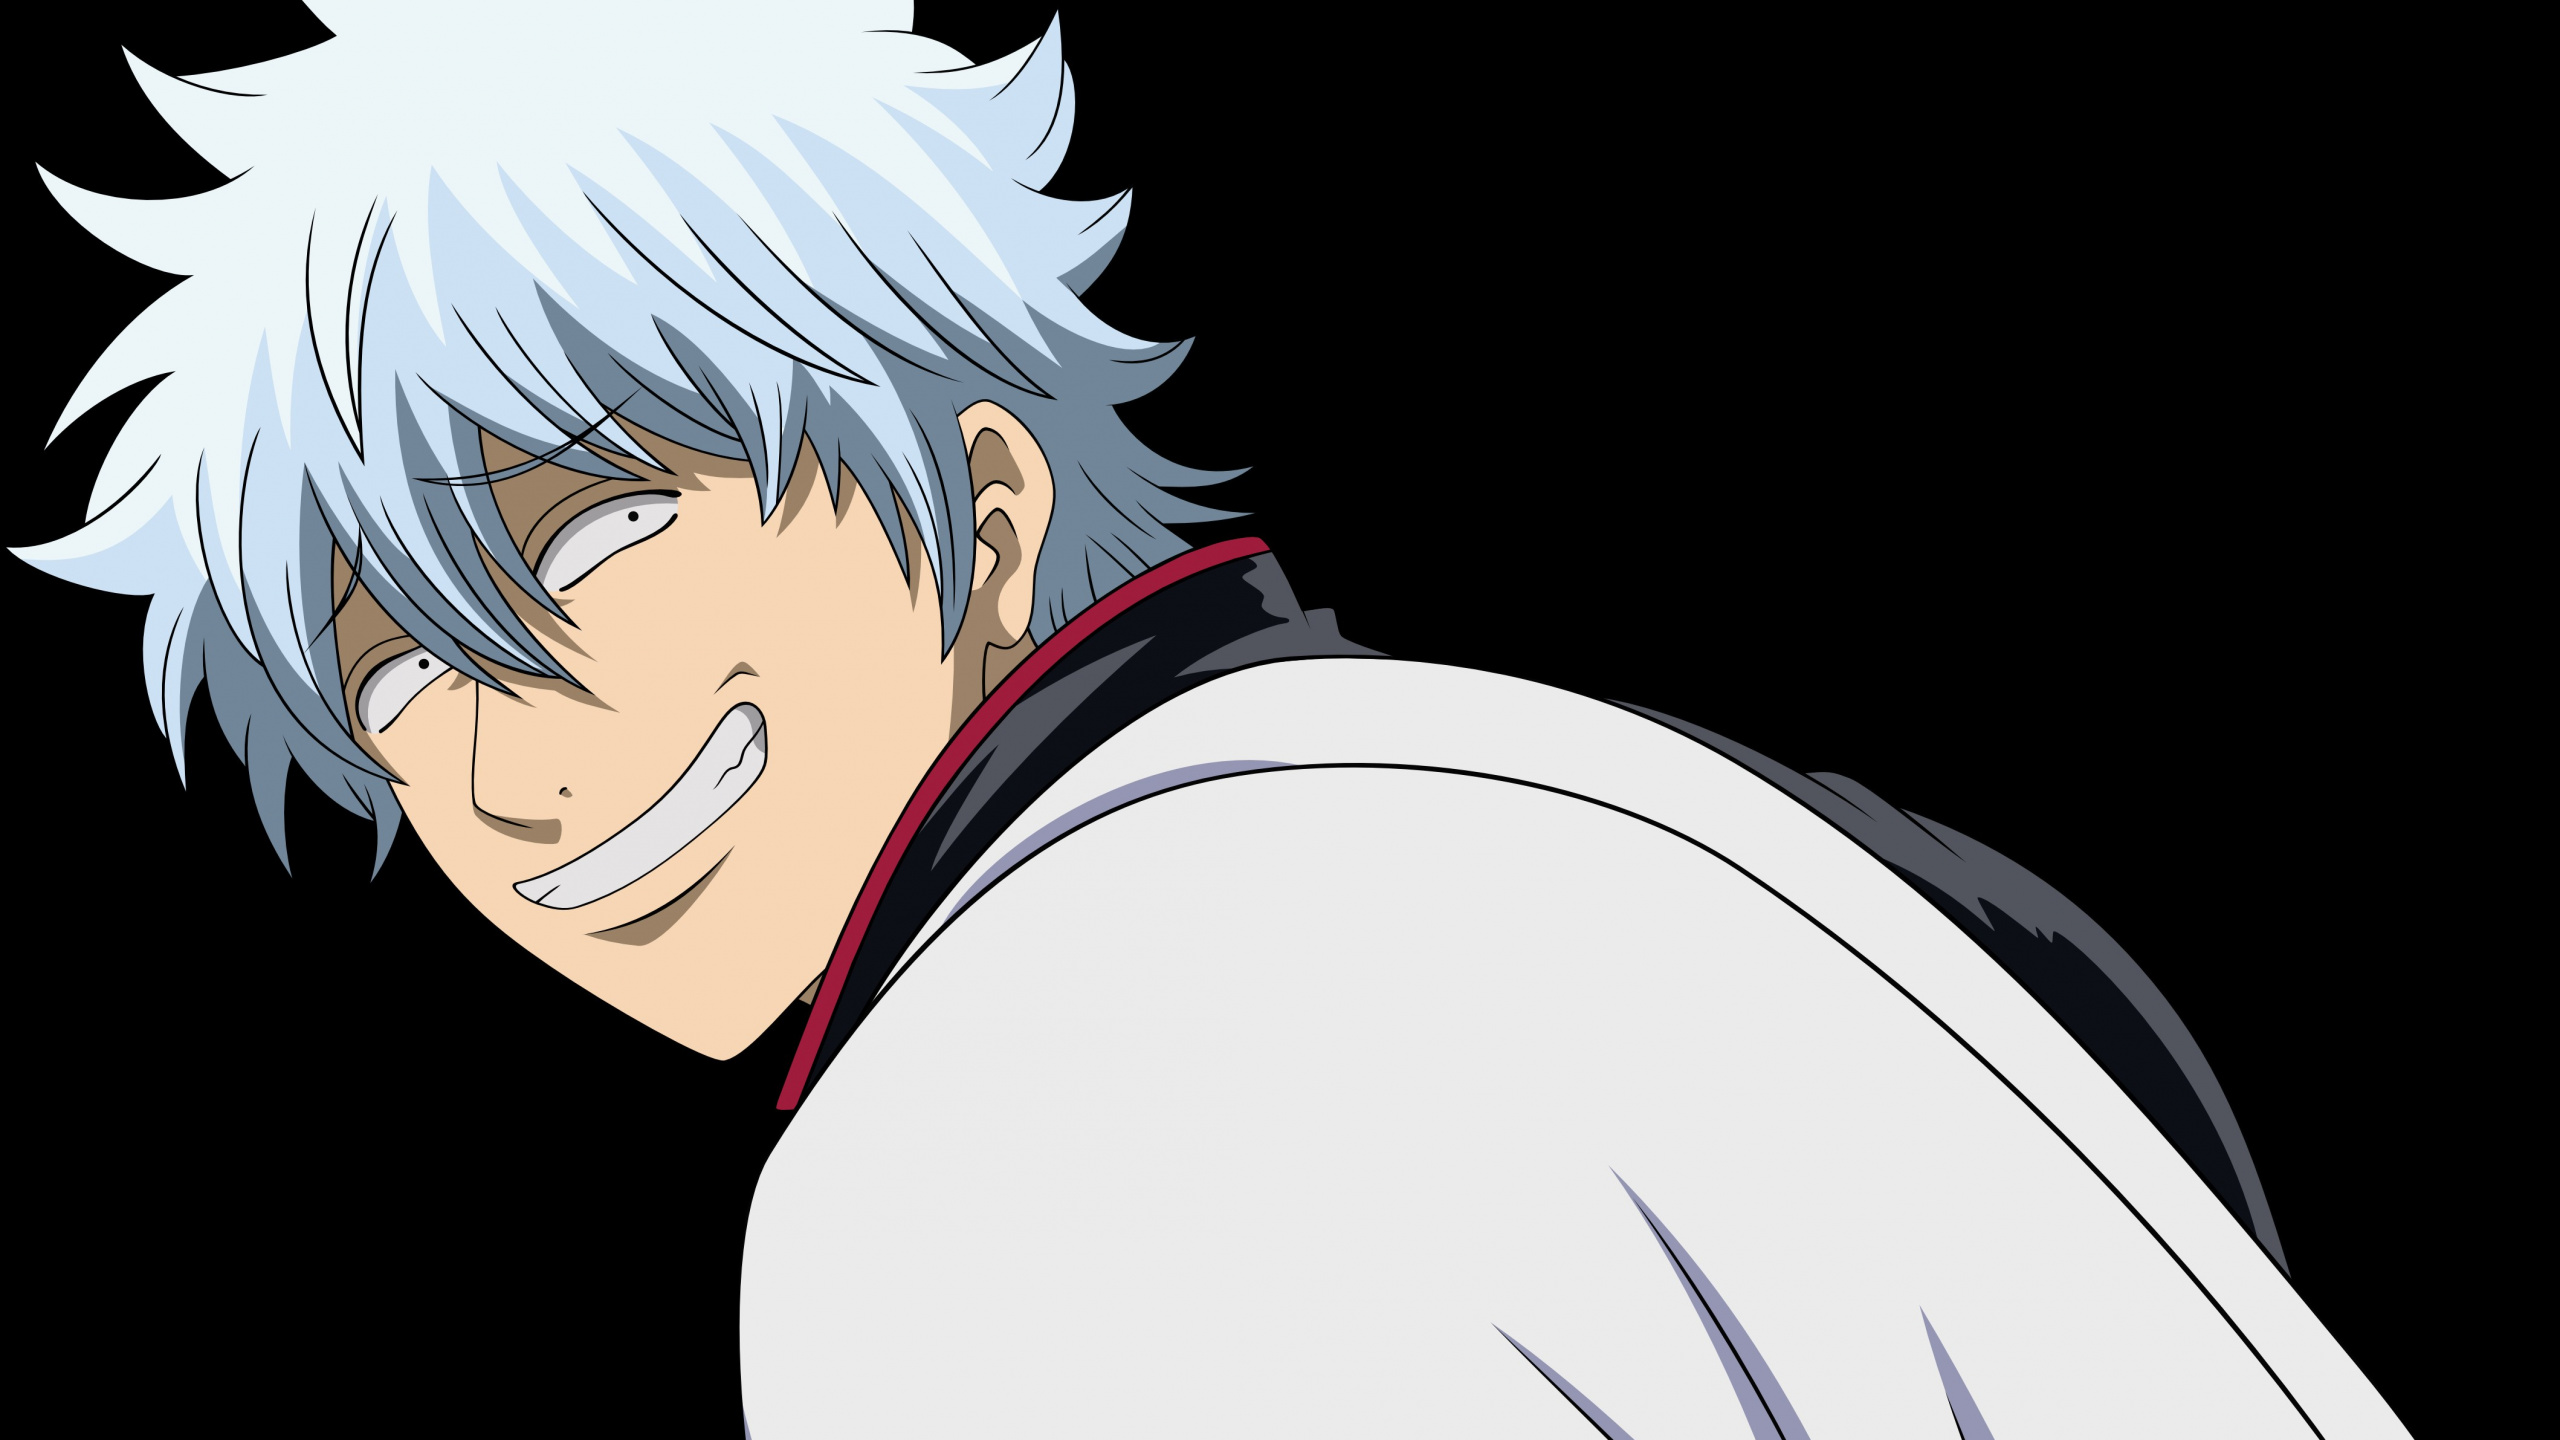 White Haired Male Anime Character. Wallpaper in 2560x1440 Resolution